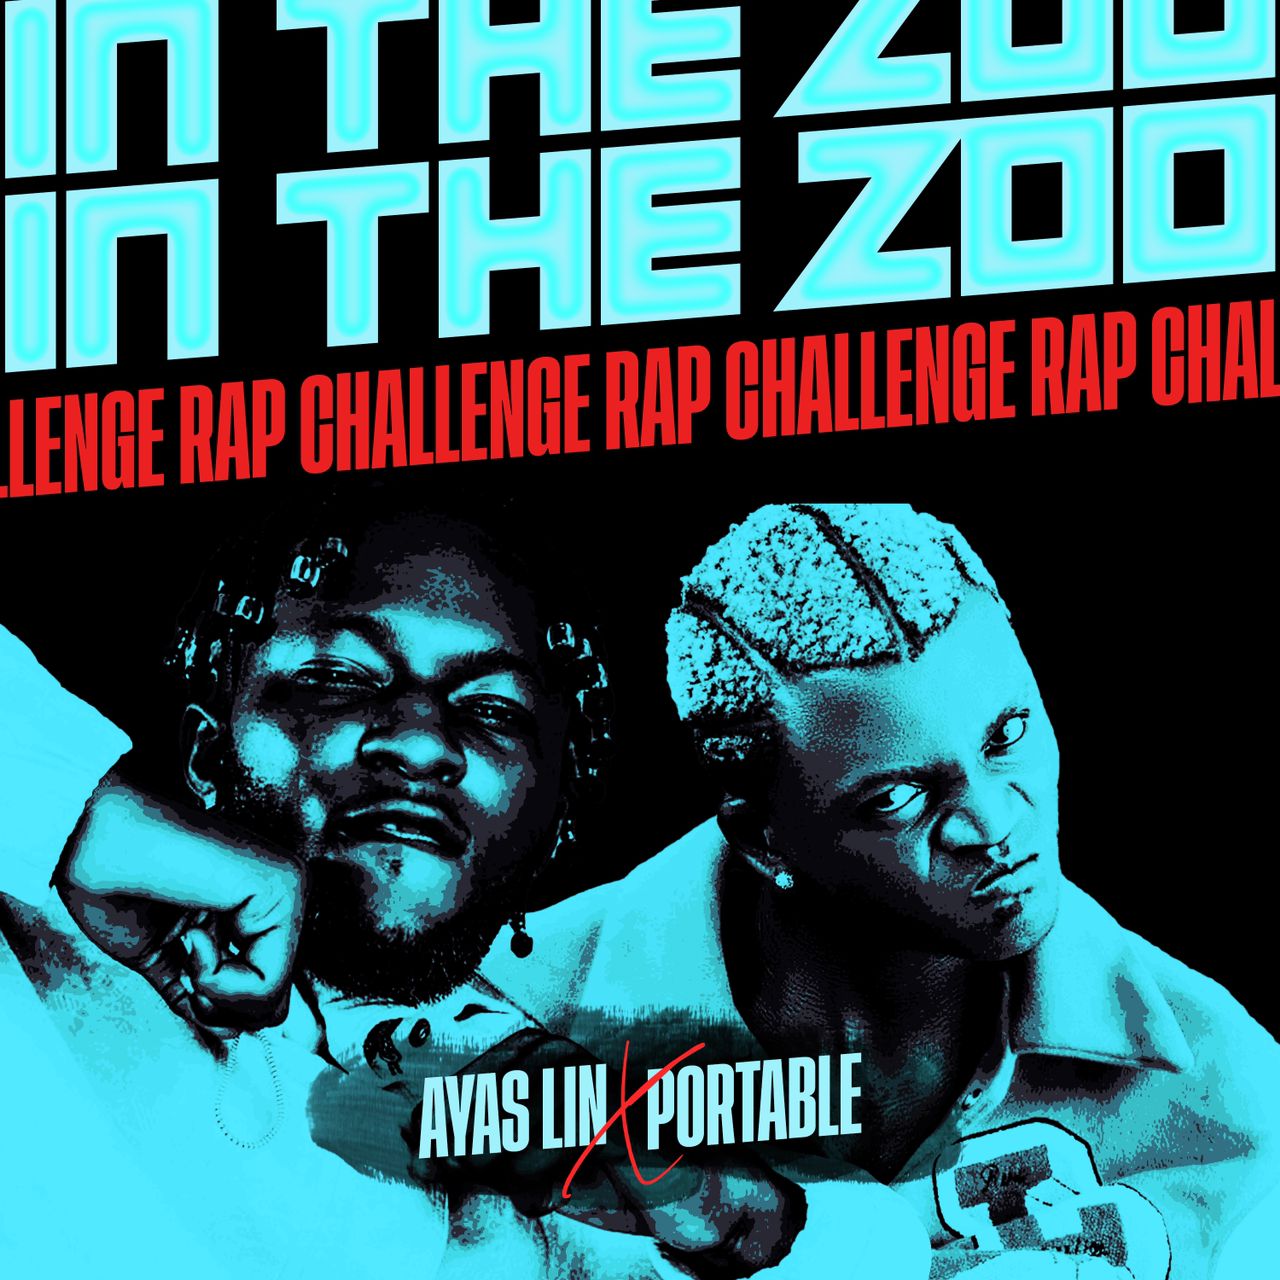 Ayas Lin x Potable - In the zoo (free verse challenge)